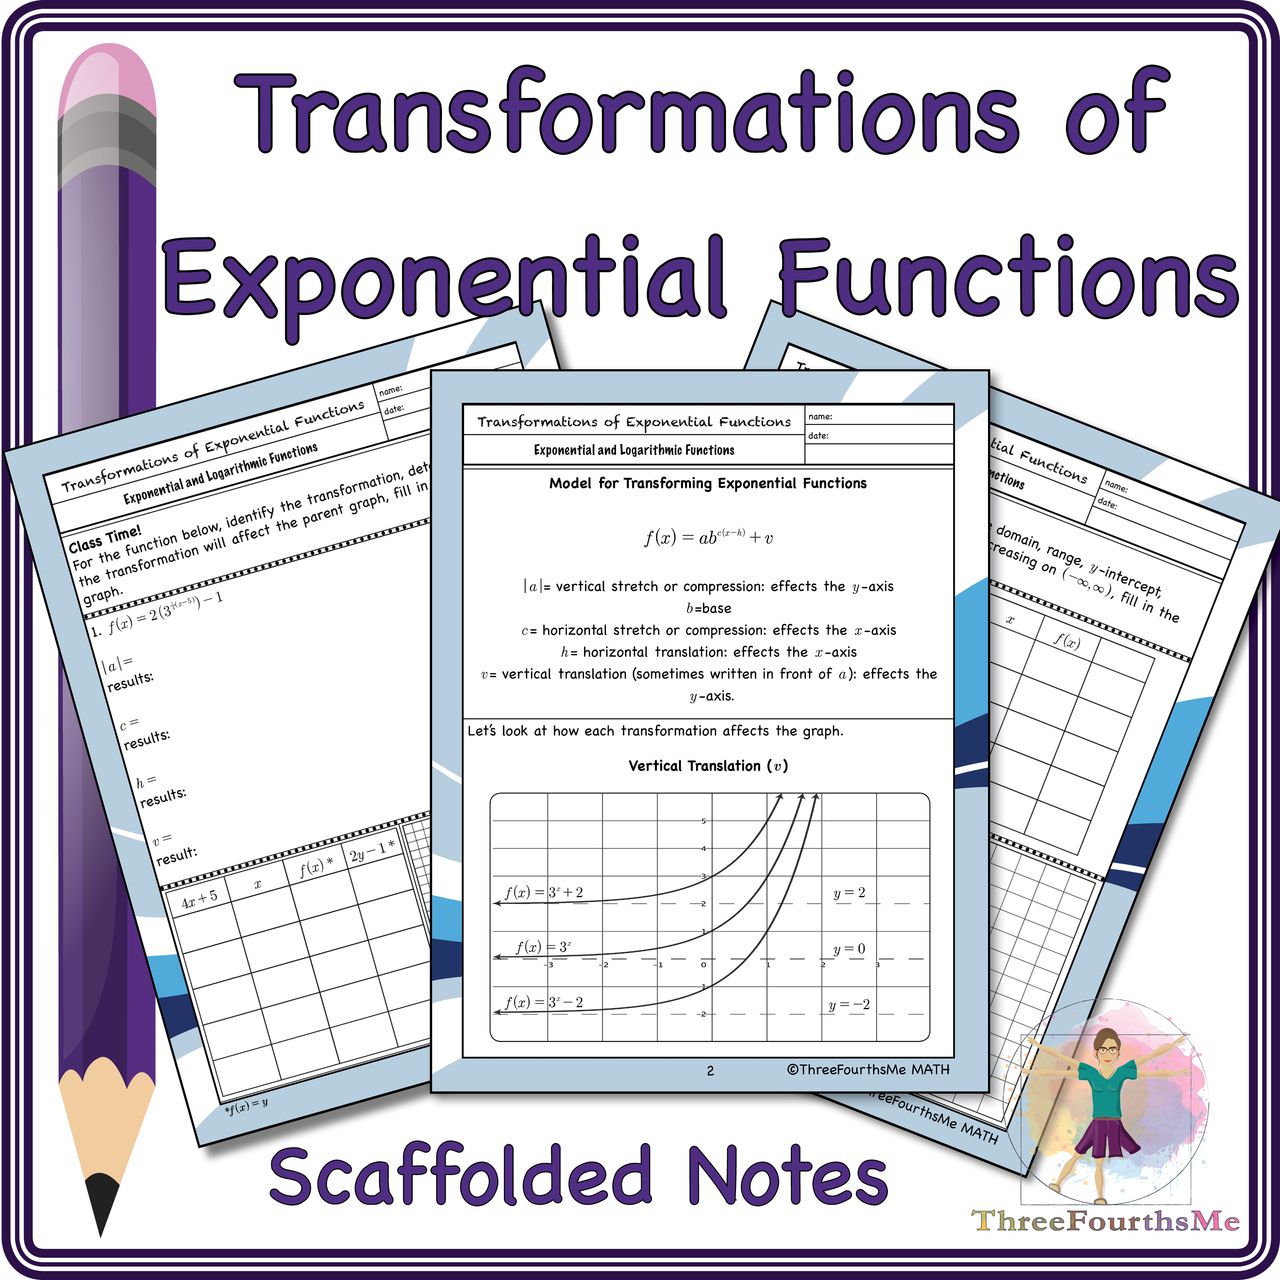 Transformations of Exponential Functions Scaffolded Notes